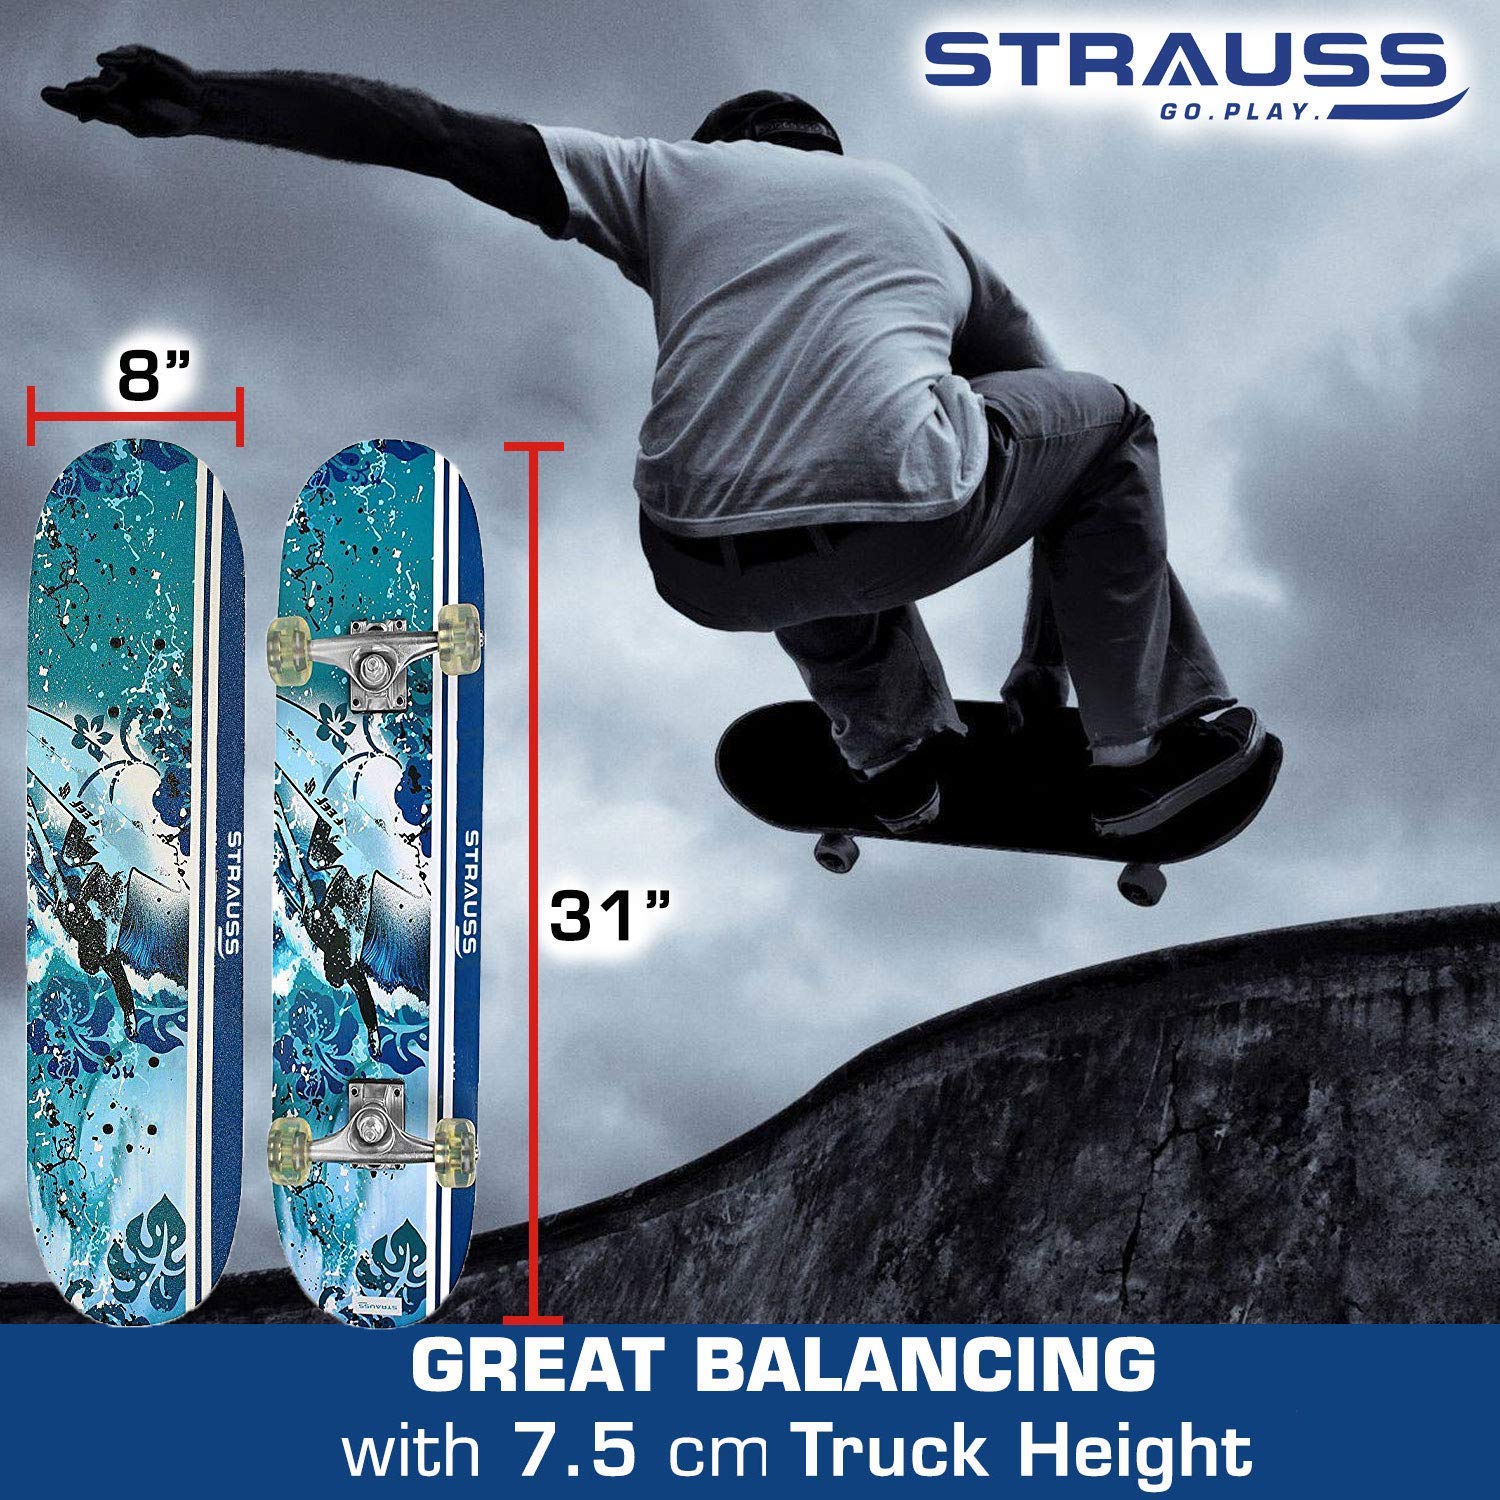 Strauss Bronx FT Skateboard, (31" x 8") with Protective Gear, Blue